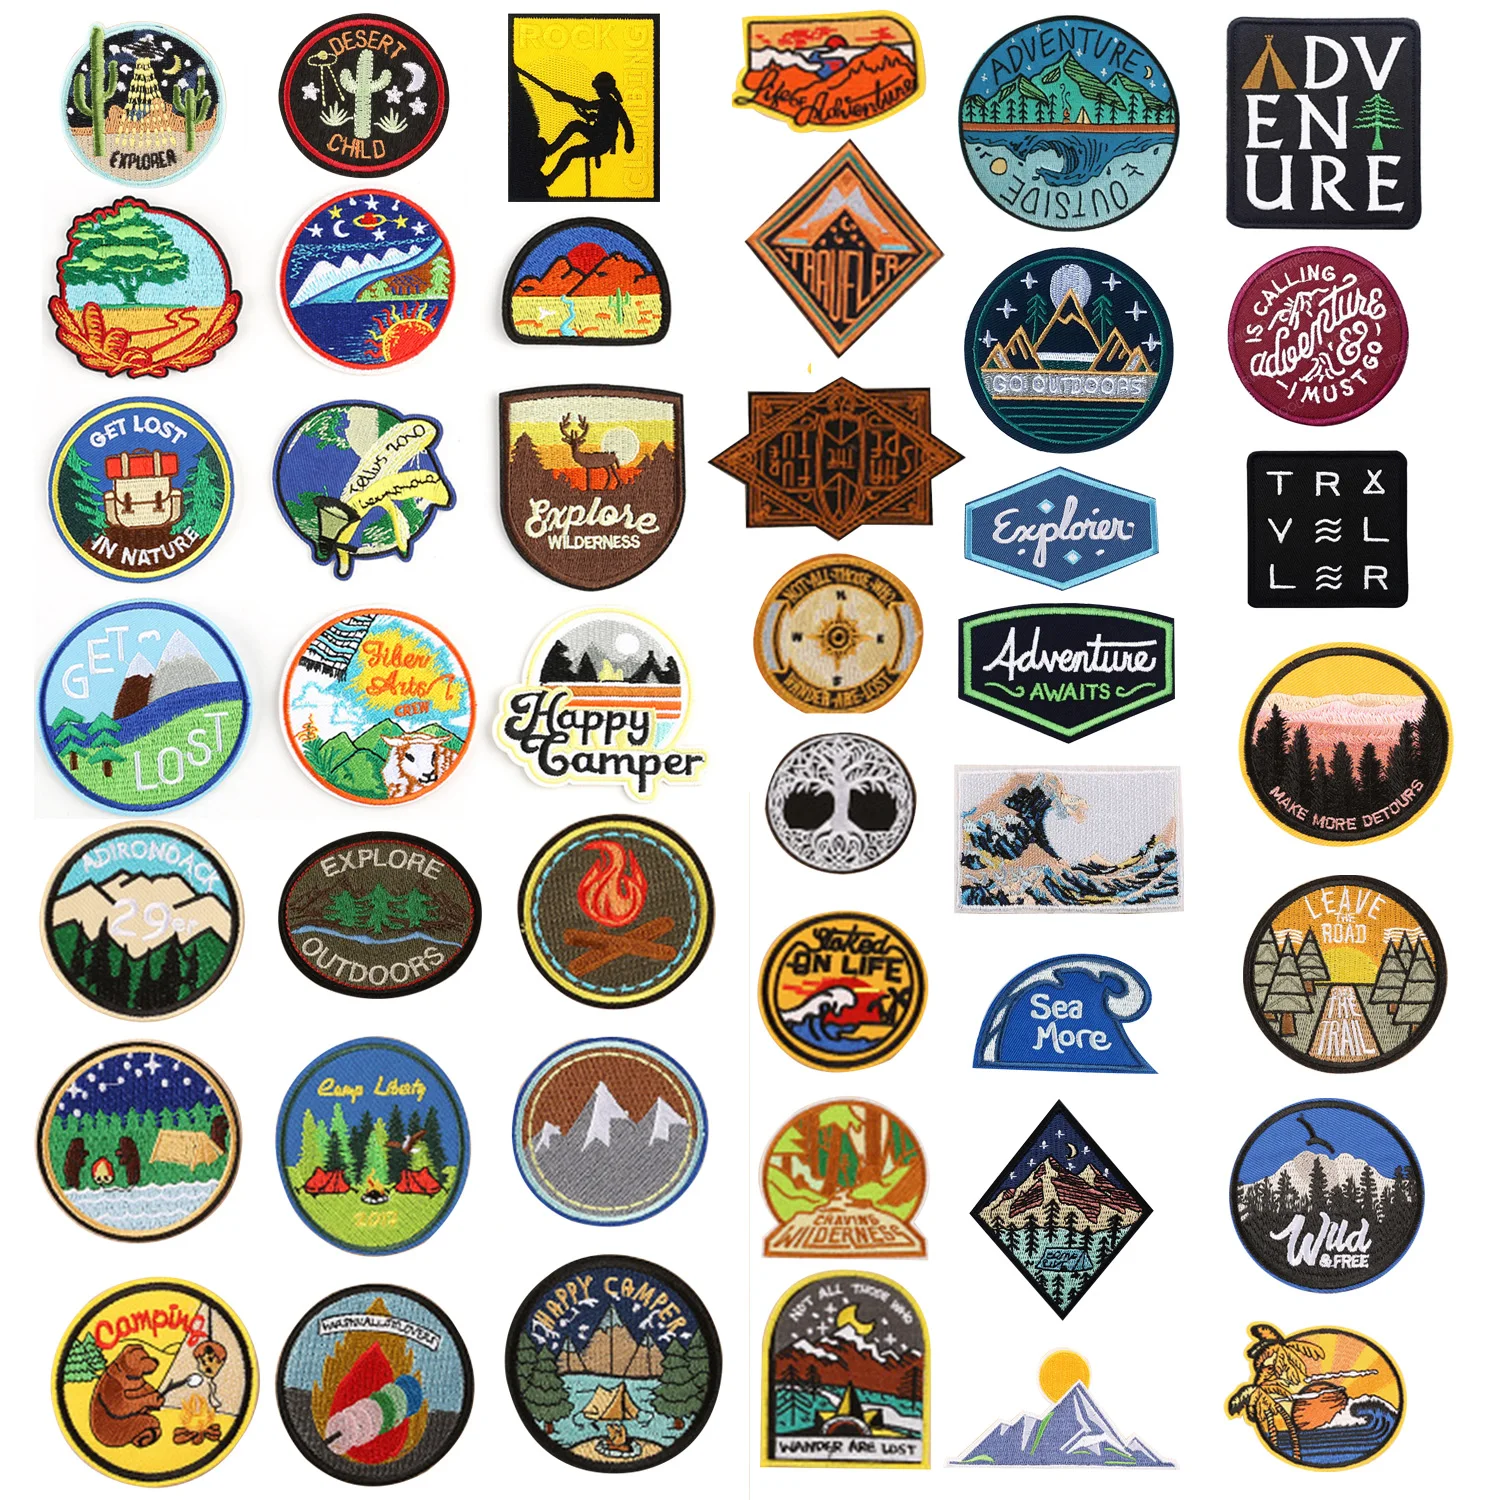 Enchanted Rock Fredericksburg Texas Hiking Patches Embroidered Applique Hook and Loop Fasteners Backing Patch Badge Emblem Sign Hiking Camping Texas 